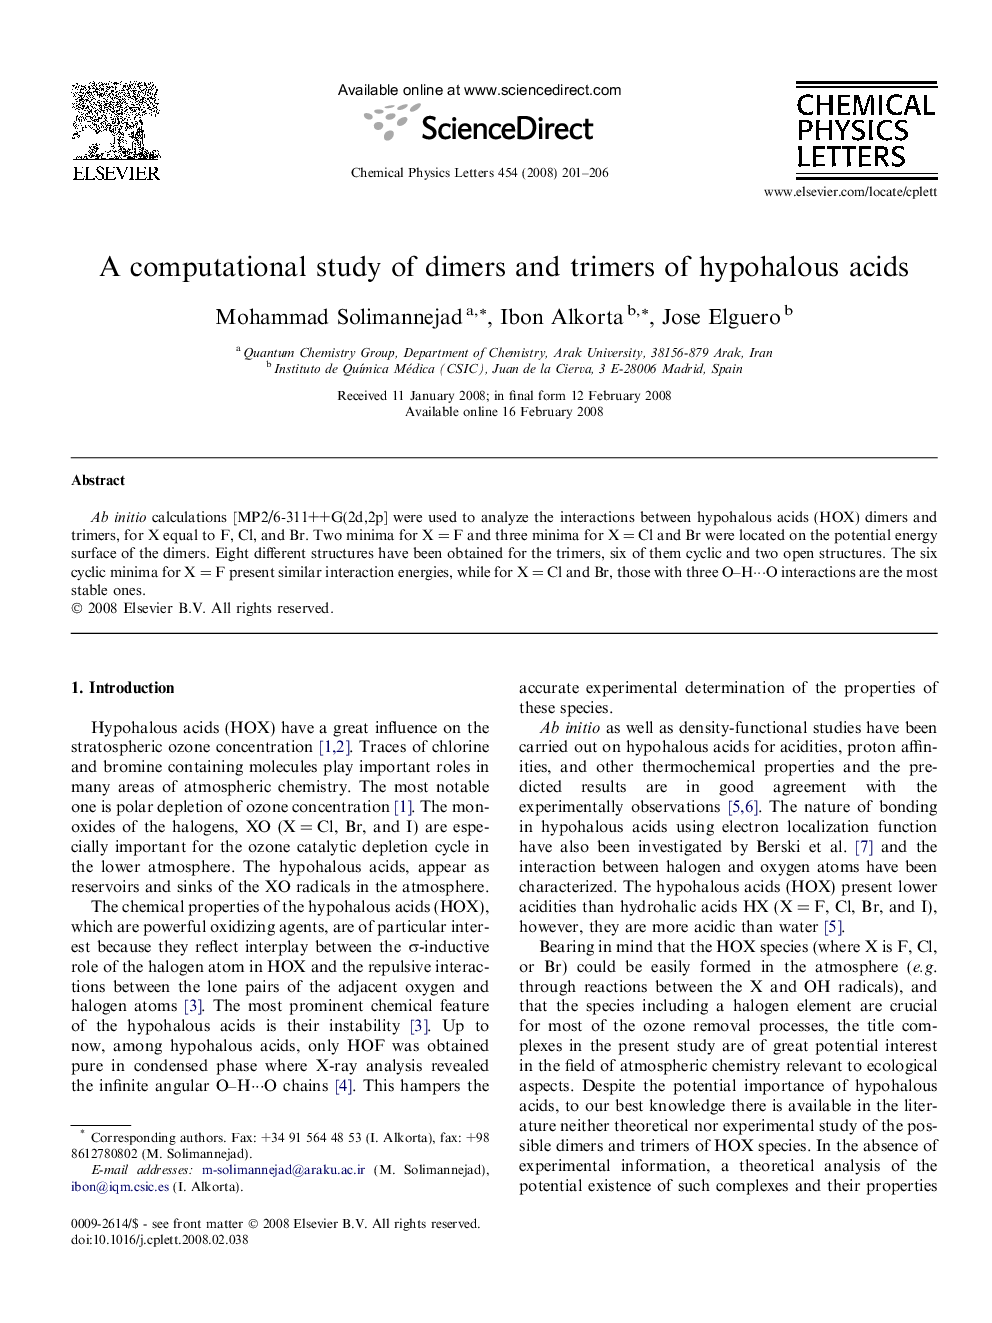 A computational study of dimers and trimers of hypohalous acids